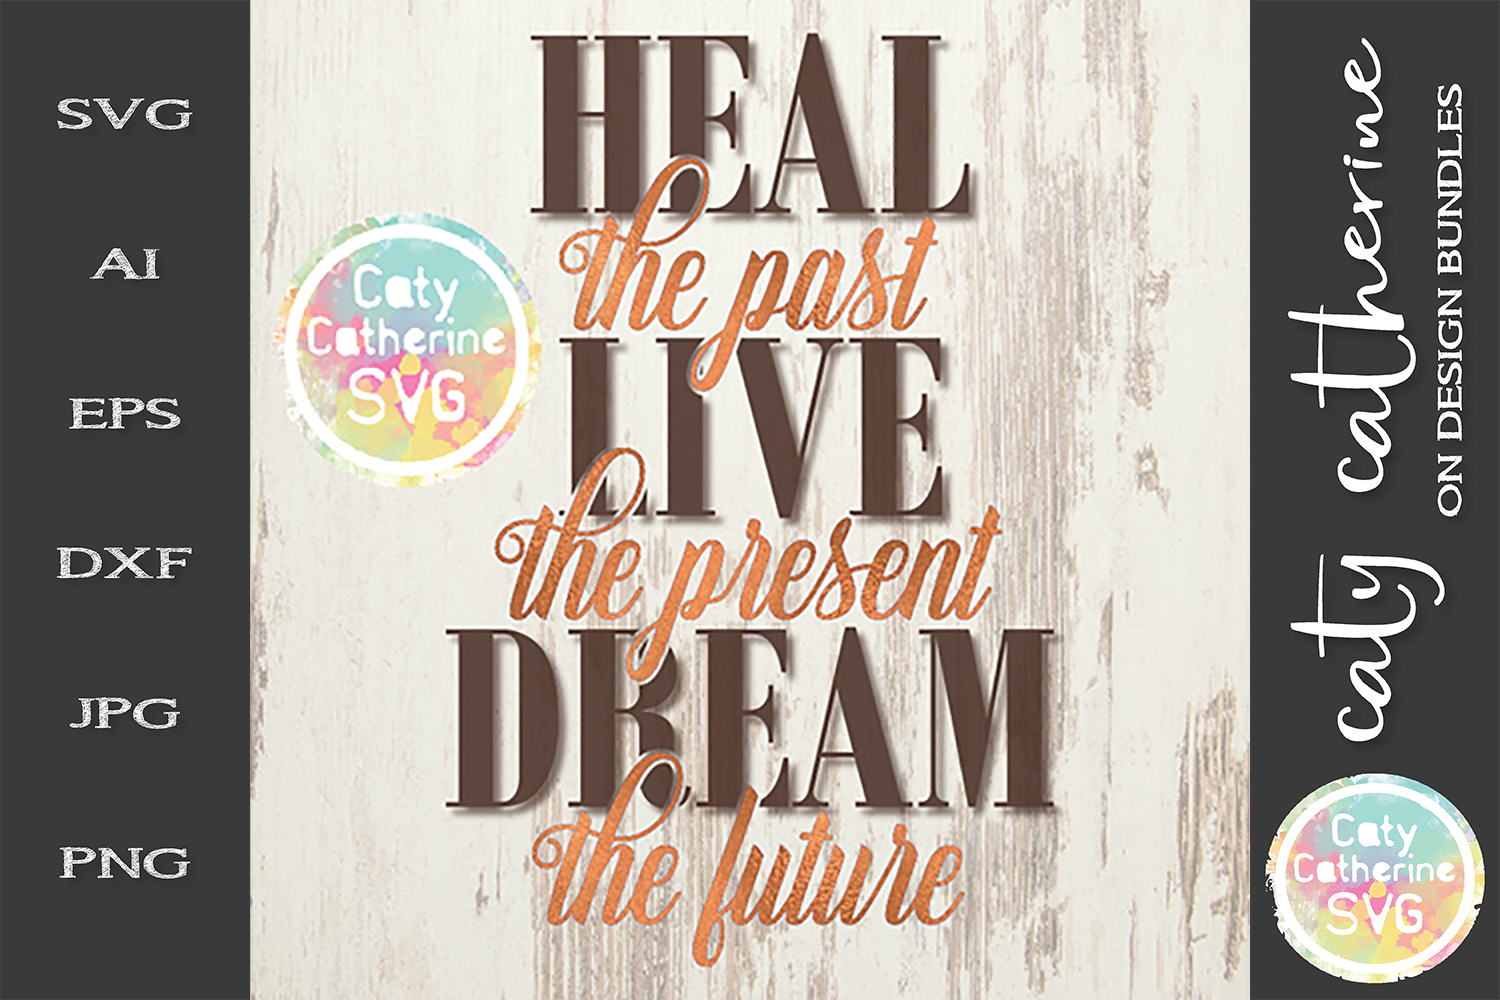 Download Heal The Past Live The Present Dream The Future SVG Cut File